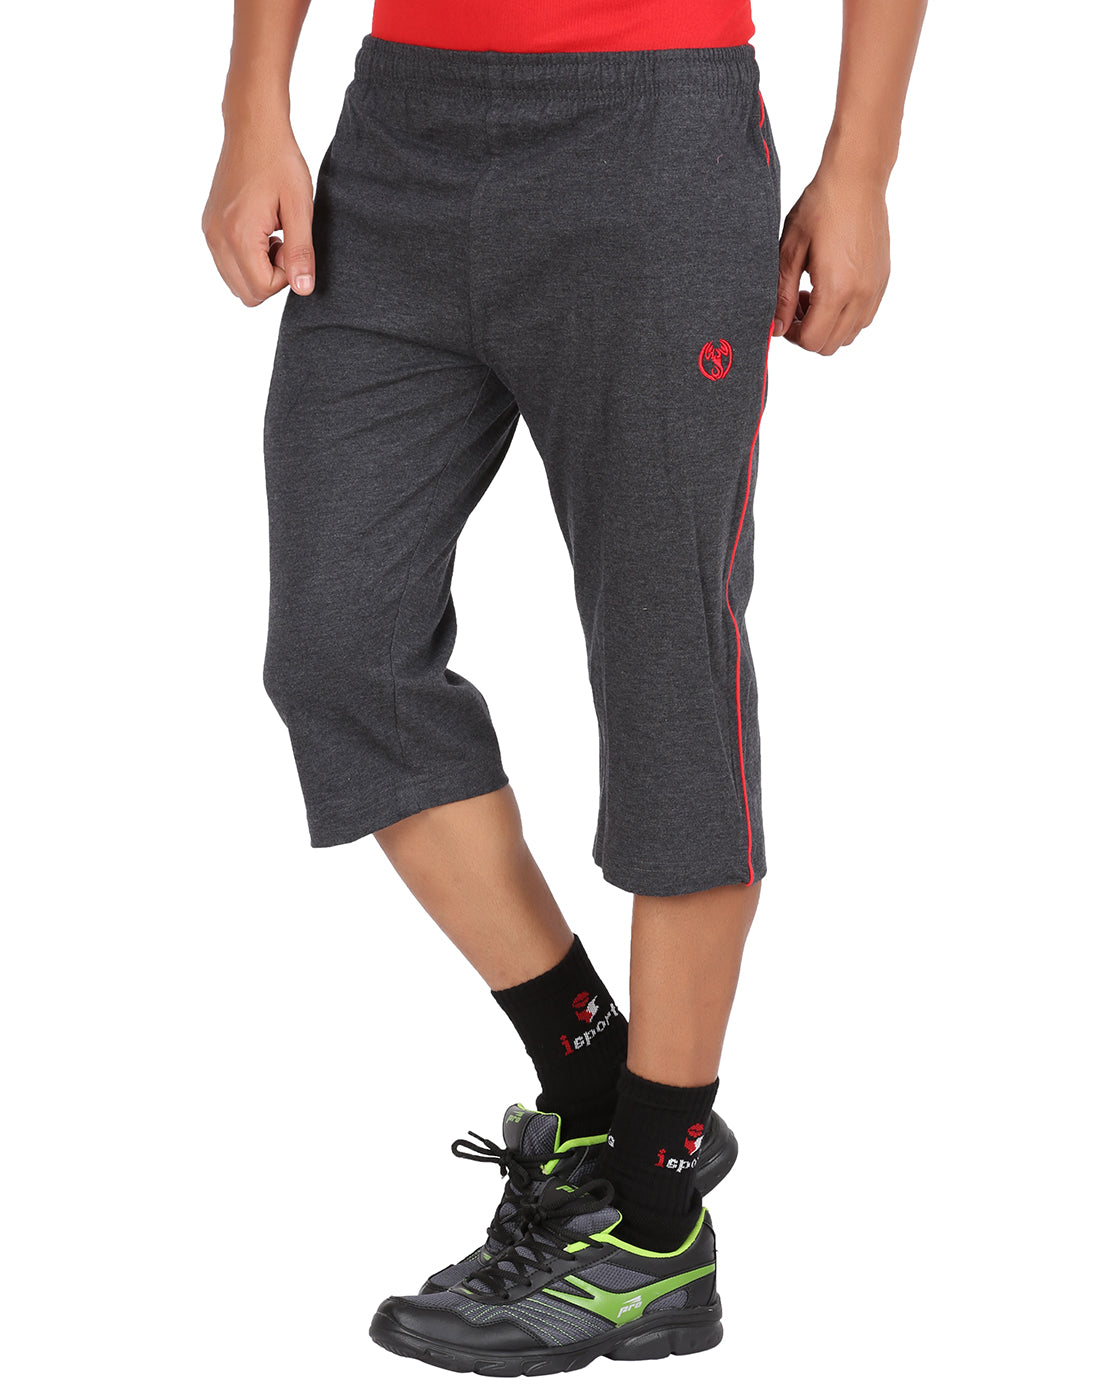 Source fashion and top quality 34 mens short pants with low price in  wholesale custom jogger pants and sports half pants on malibabacom